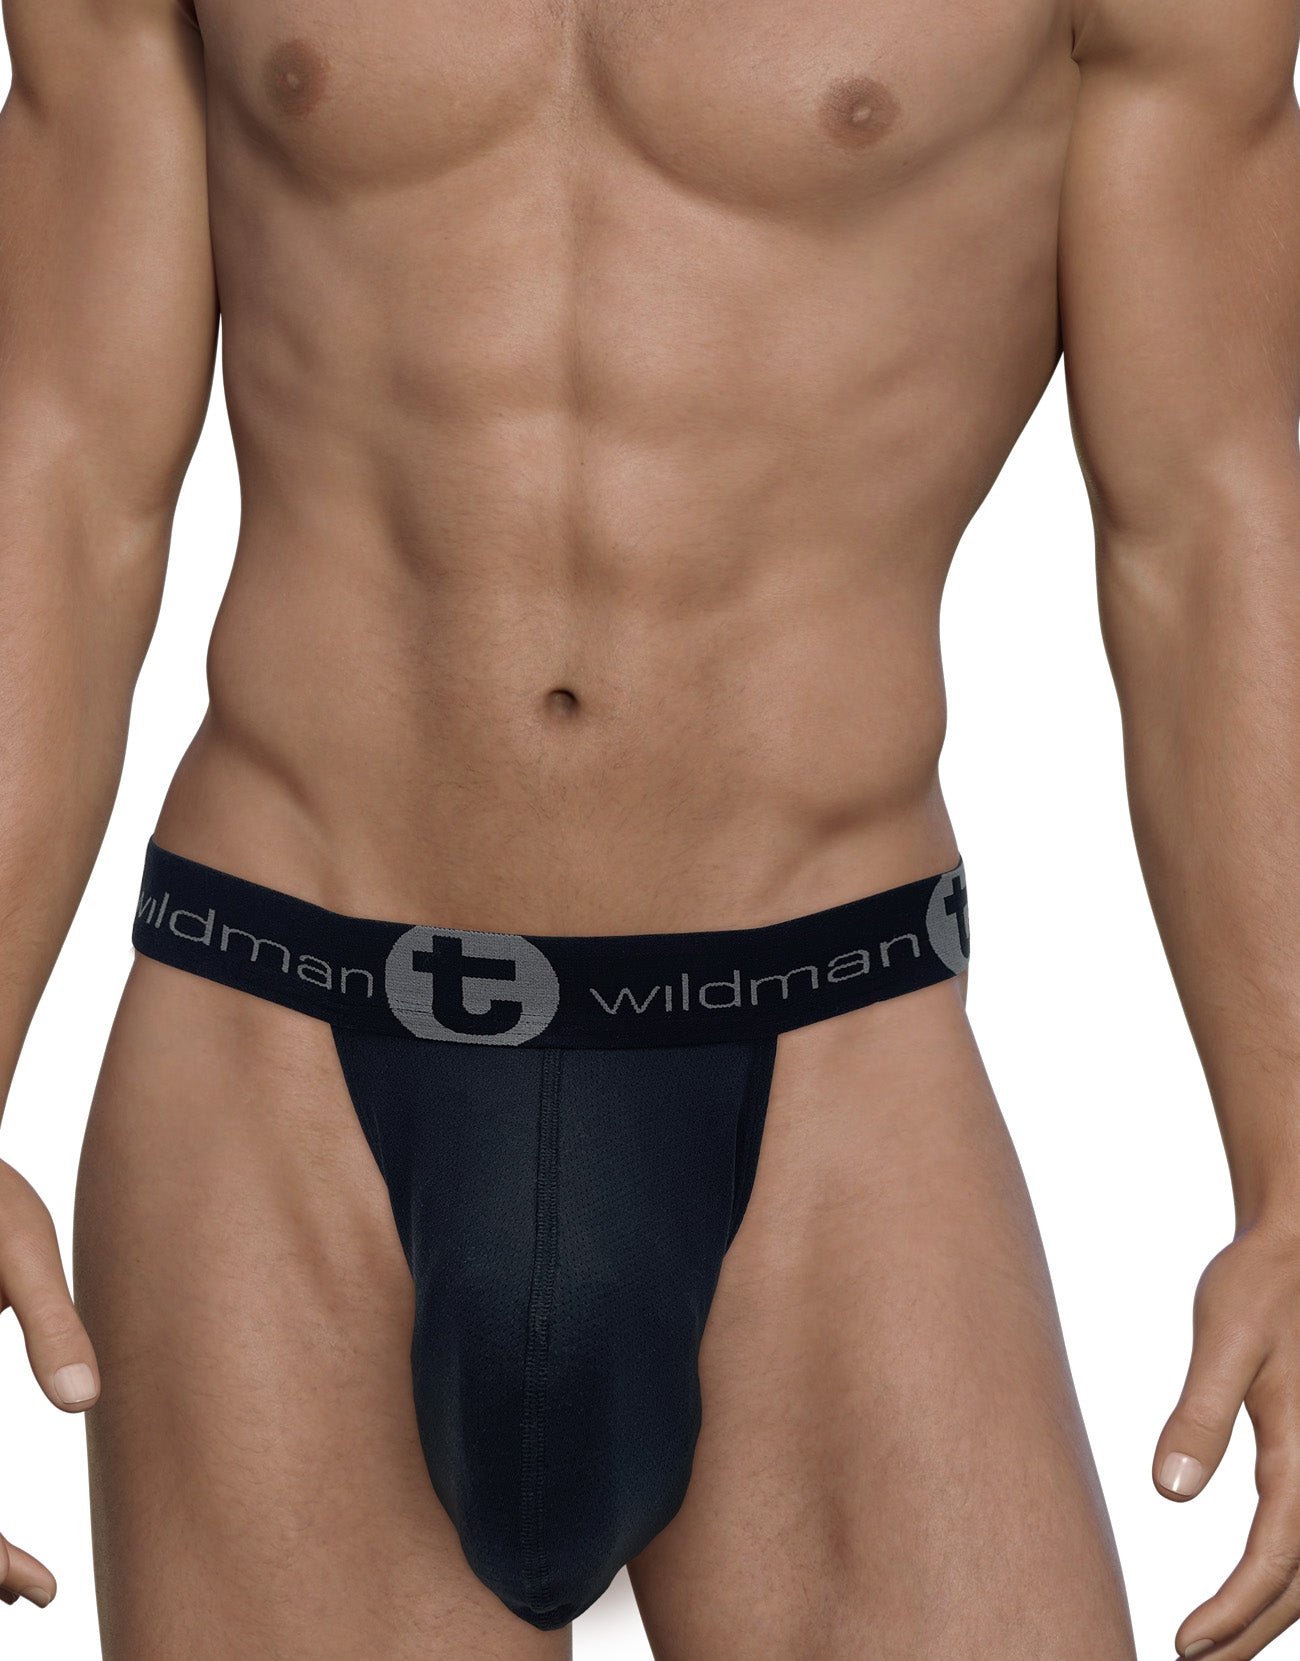 WildmanT Mesh Monster Cock Strapless Pouch Black - DealByEthan.gay